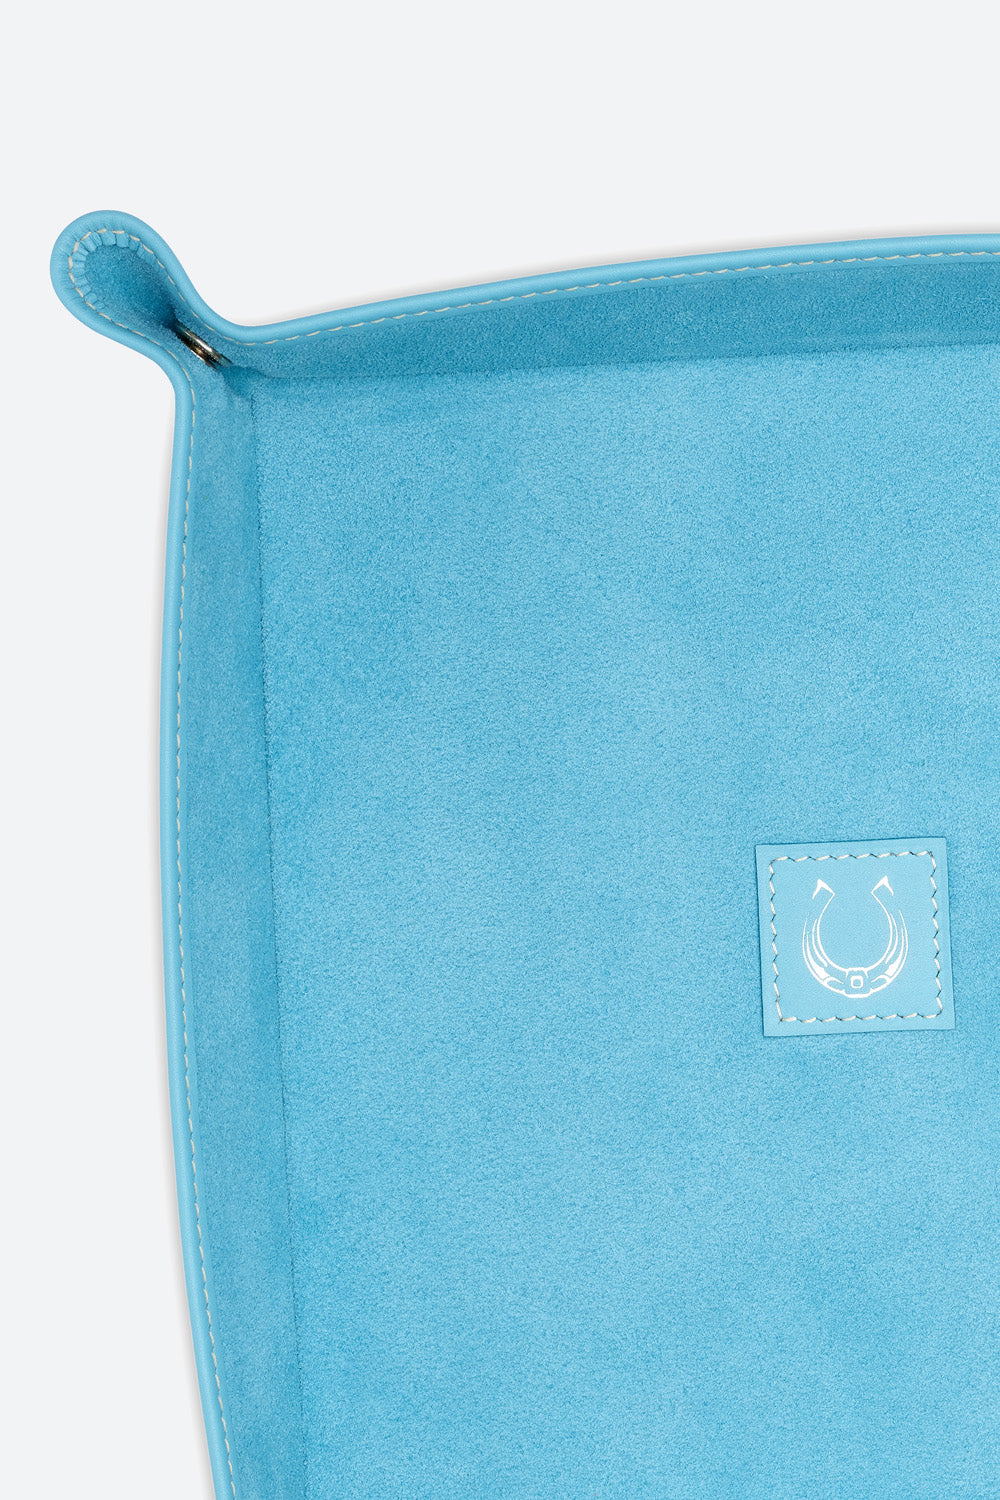 Large Square Leather Valet Tray in Light Blue